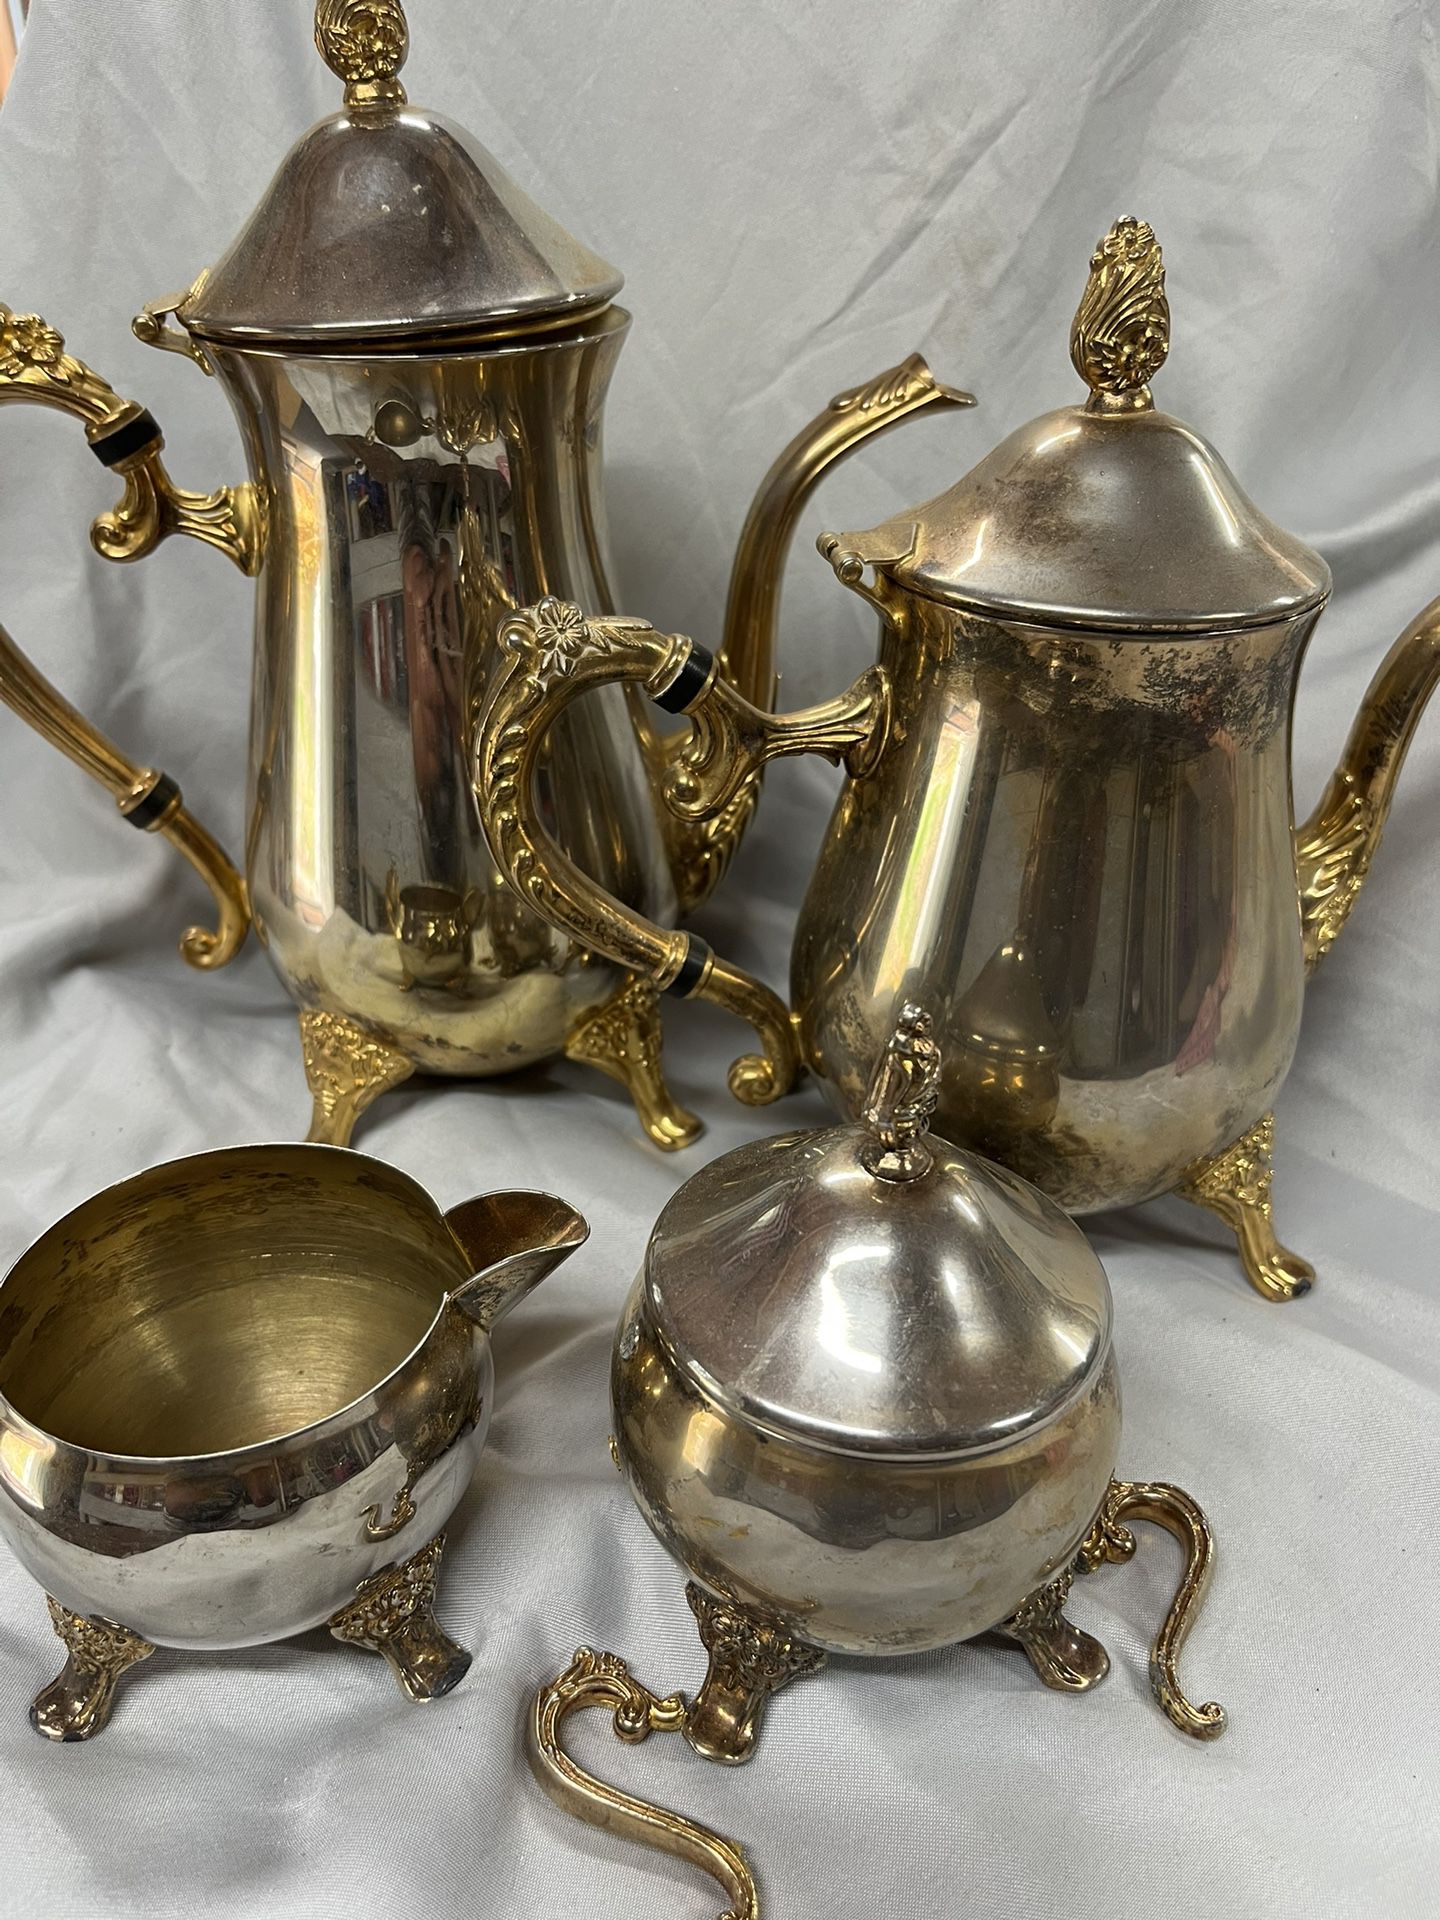 Vintage Tea Service Set- Gold Plated & Quality Collection 